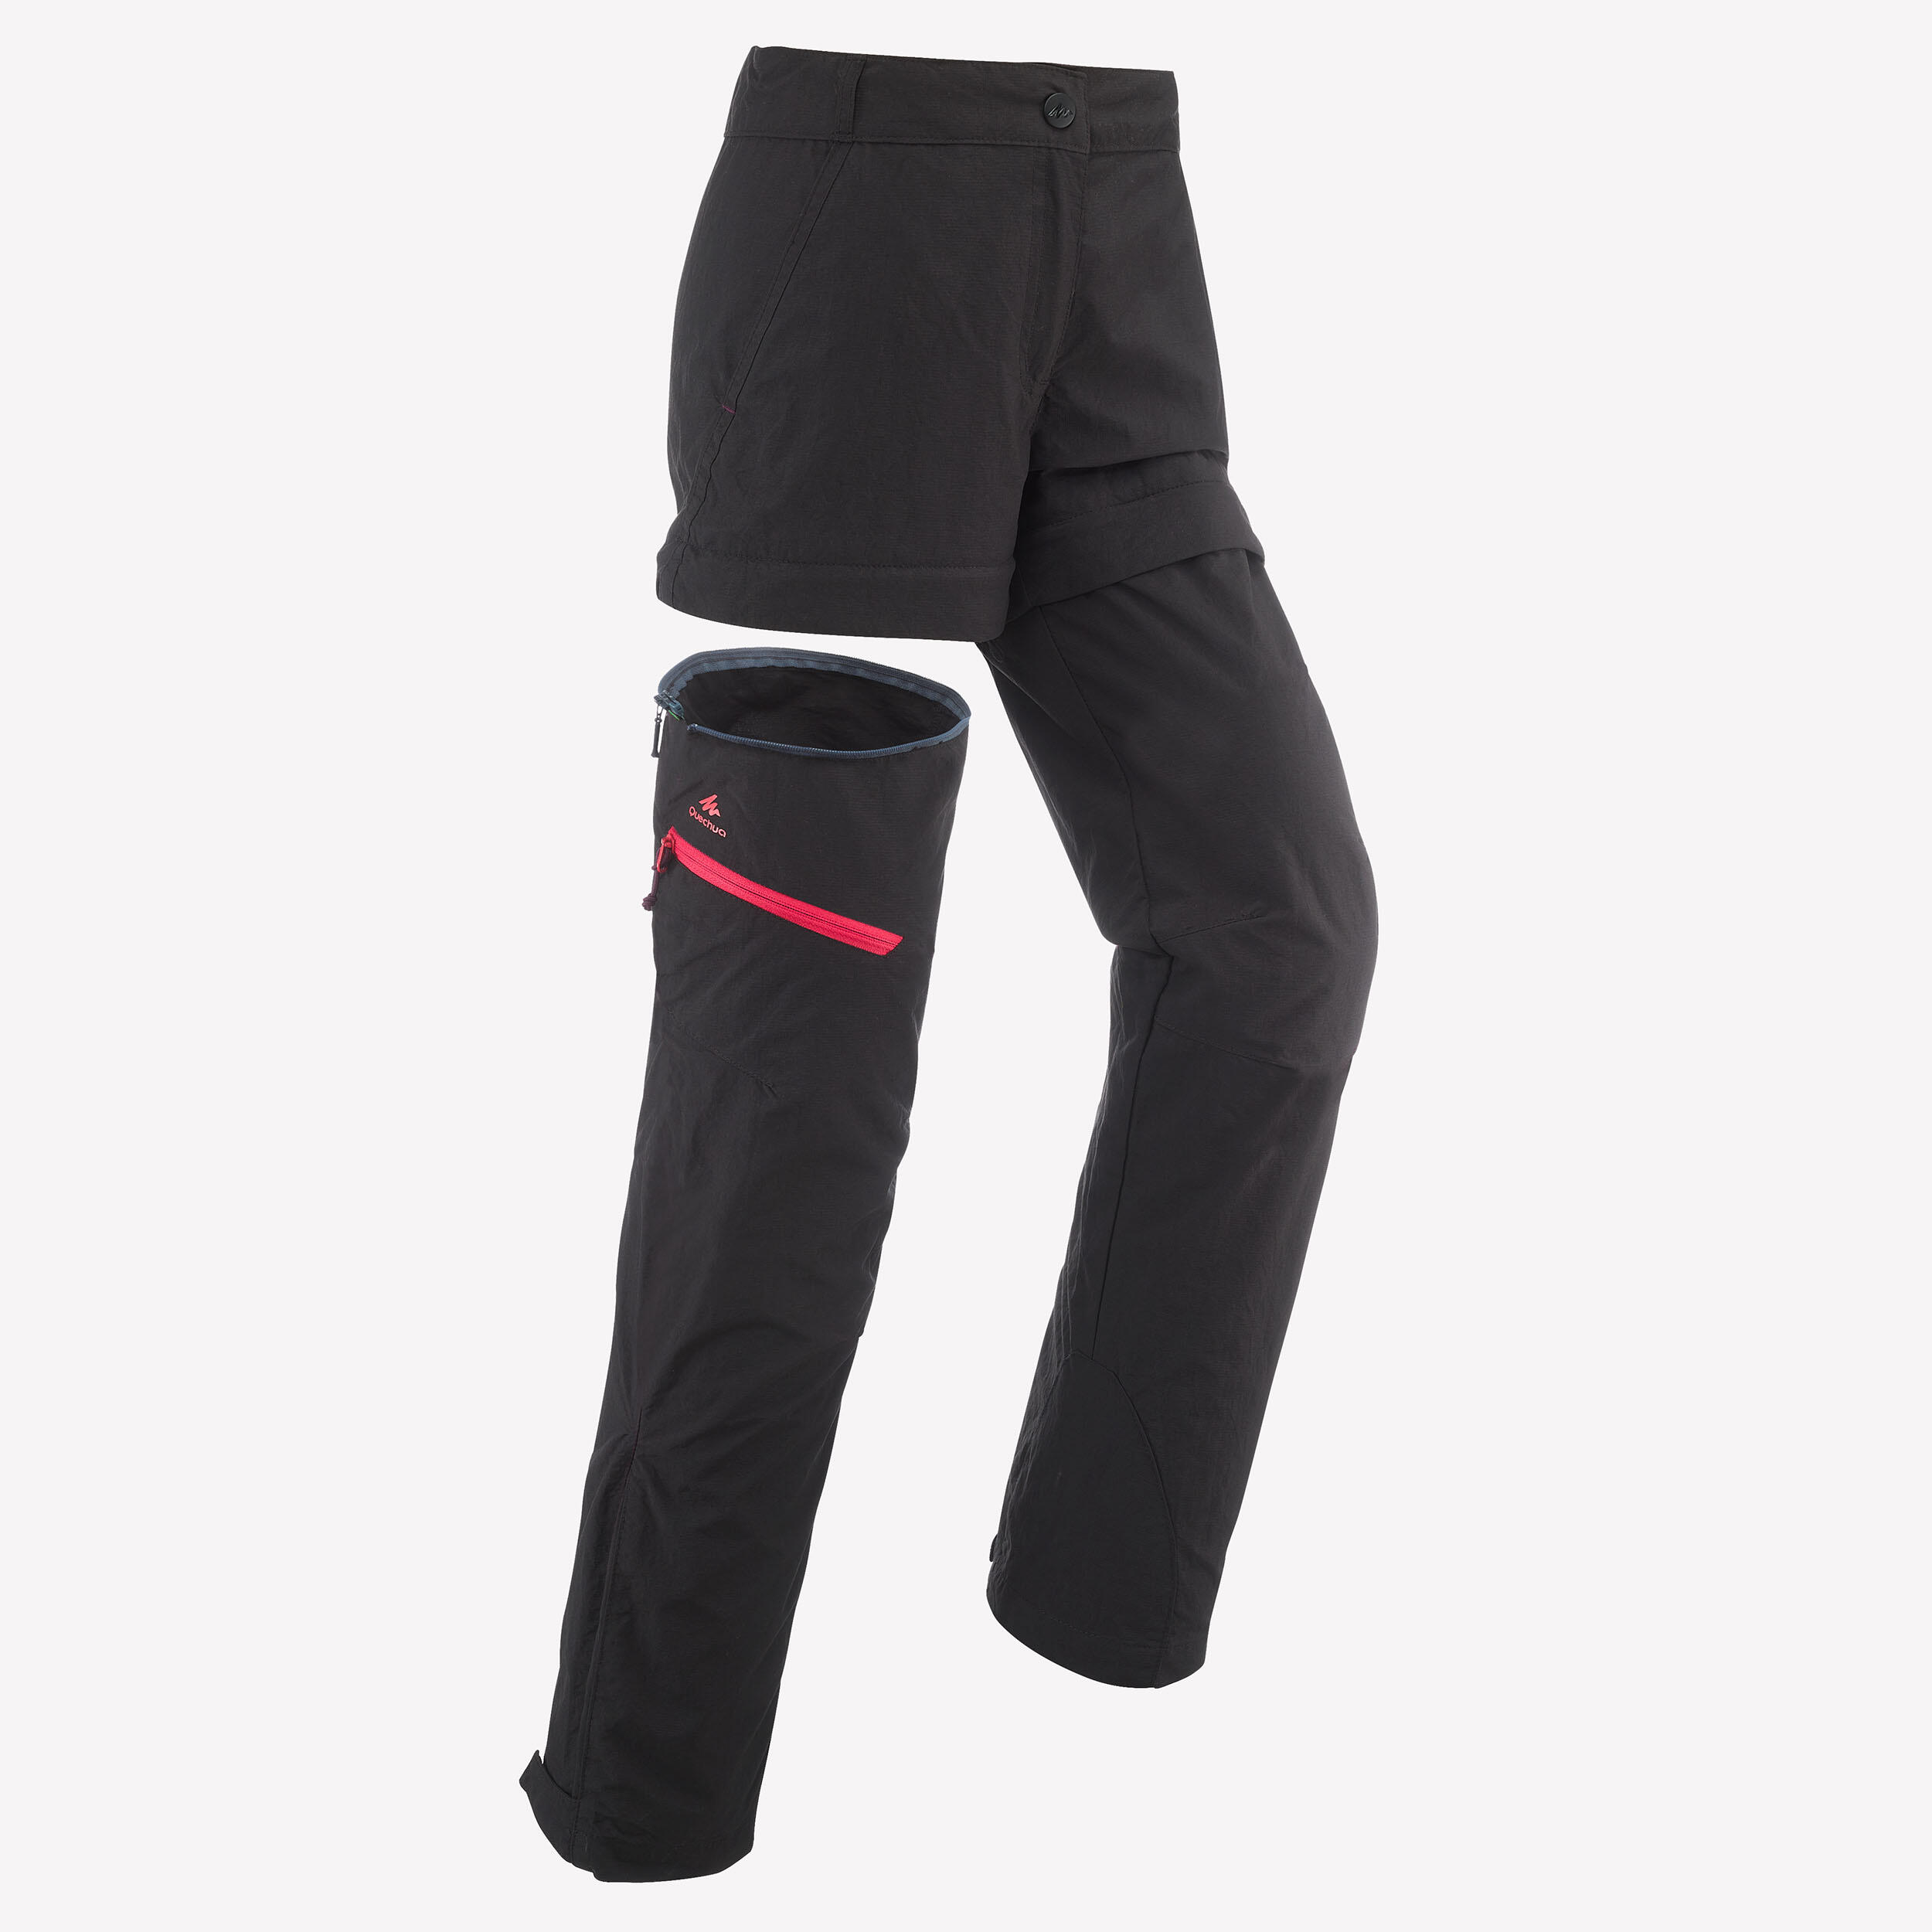 DECATHLON 3691 WATERPROOF over trousers 133-142cm - 10 year old EXCELLENT  COND. £2.99 - PicClick UK